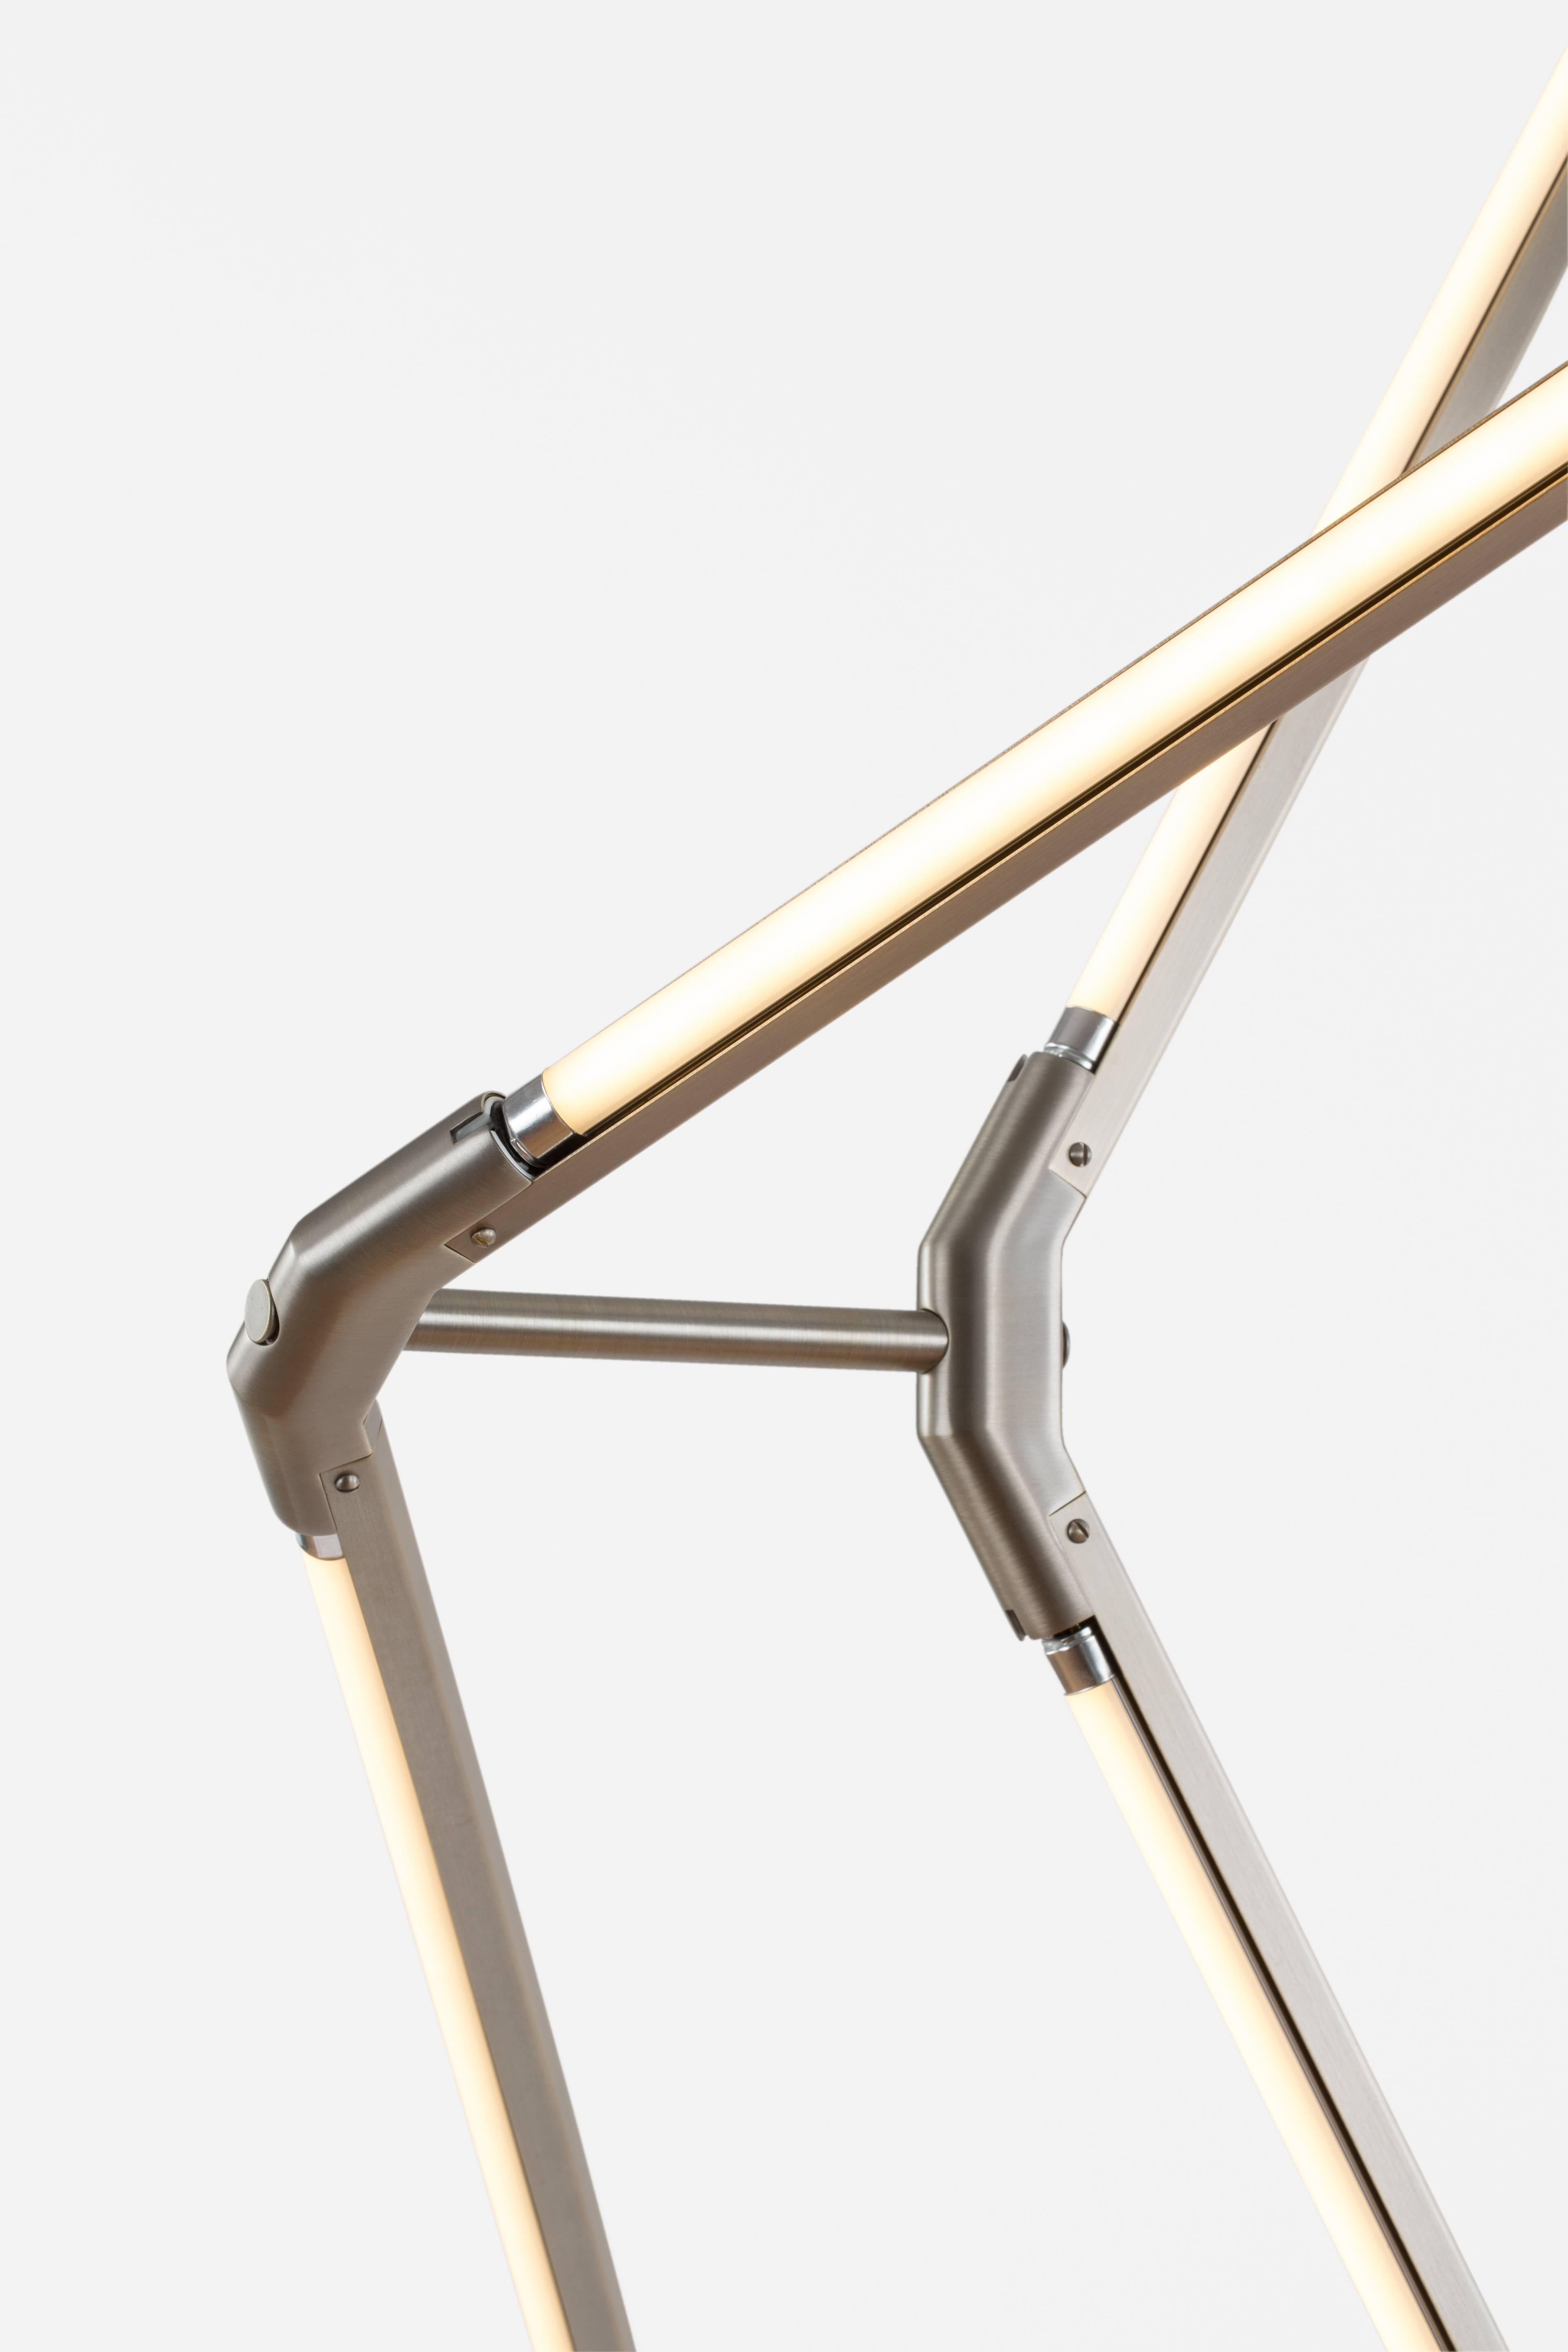 Zelda juxtaposes the powerful materiality of brass-encased LED tubing with gracefully suspending planar forms. This light comes in multiple shapes, sizes, and configurations, and seamlessly adapts to a vast array of spaces and sensibilities. Zelda's